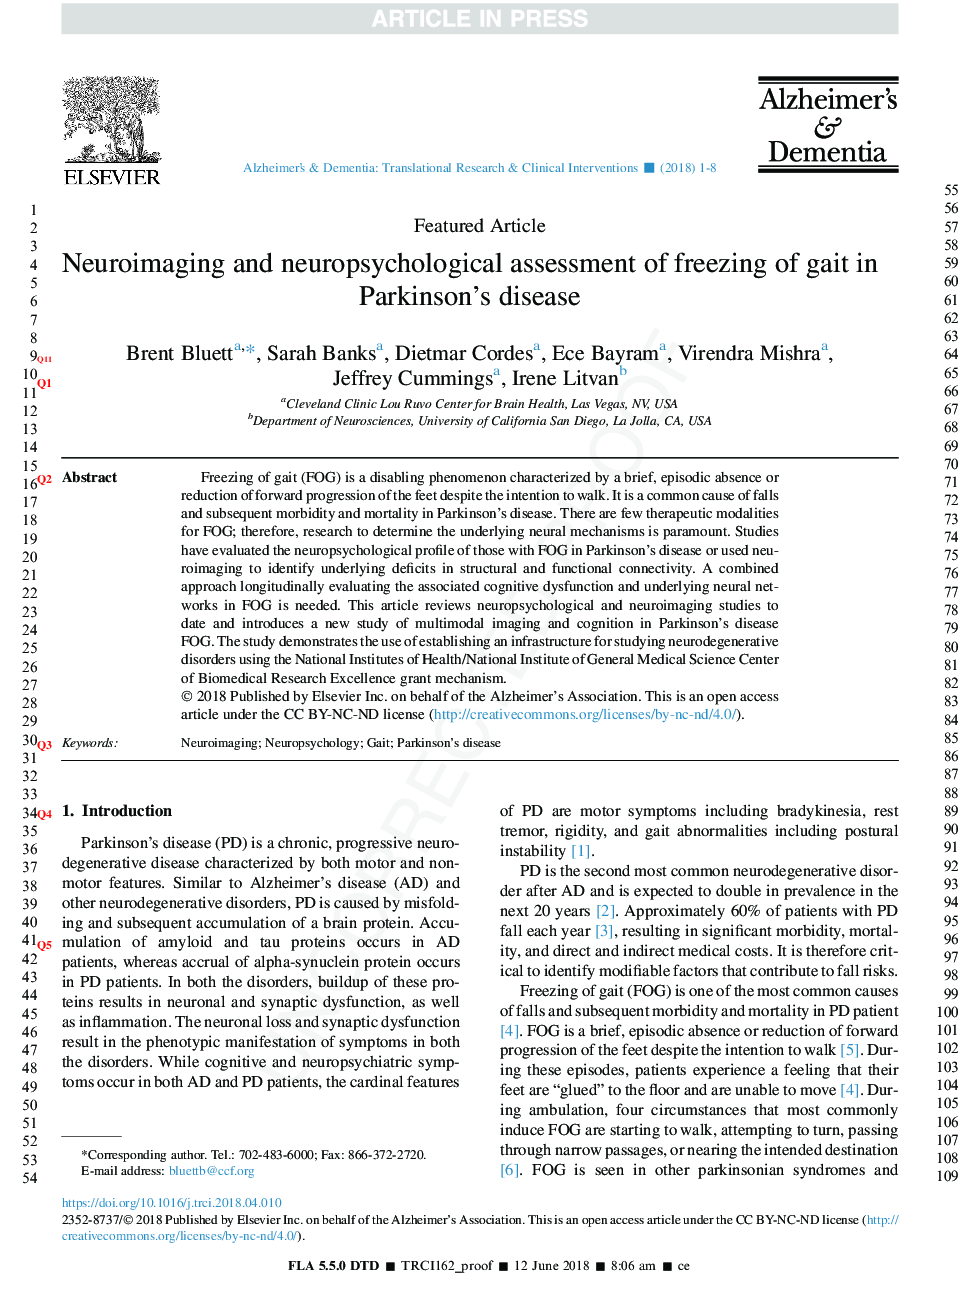 Neuroimaging and neuropsychological assessment of freezing of gait in Parkinson's disease